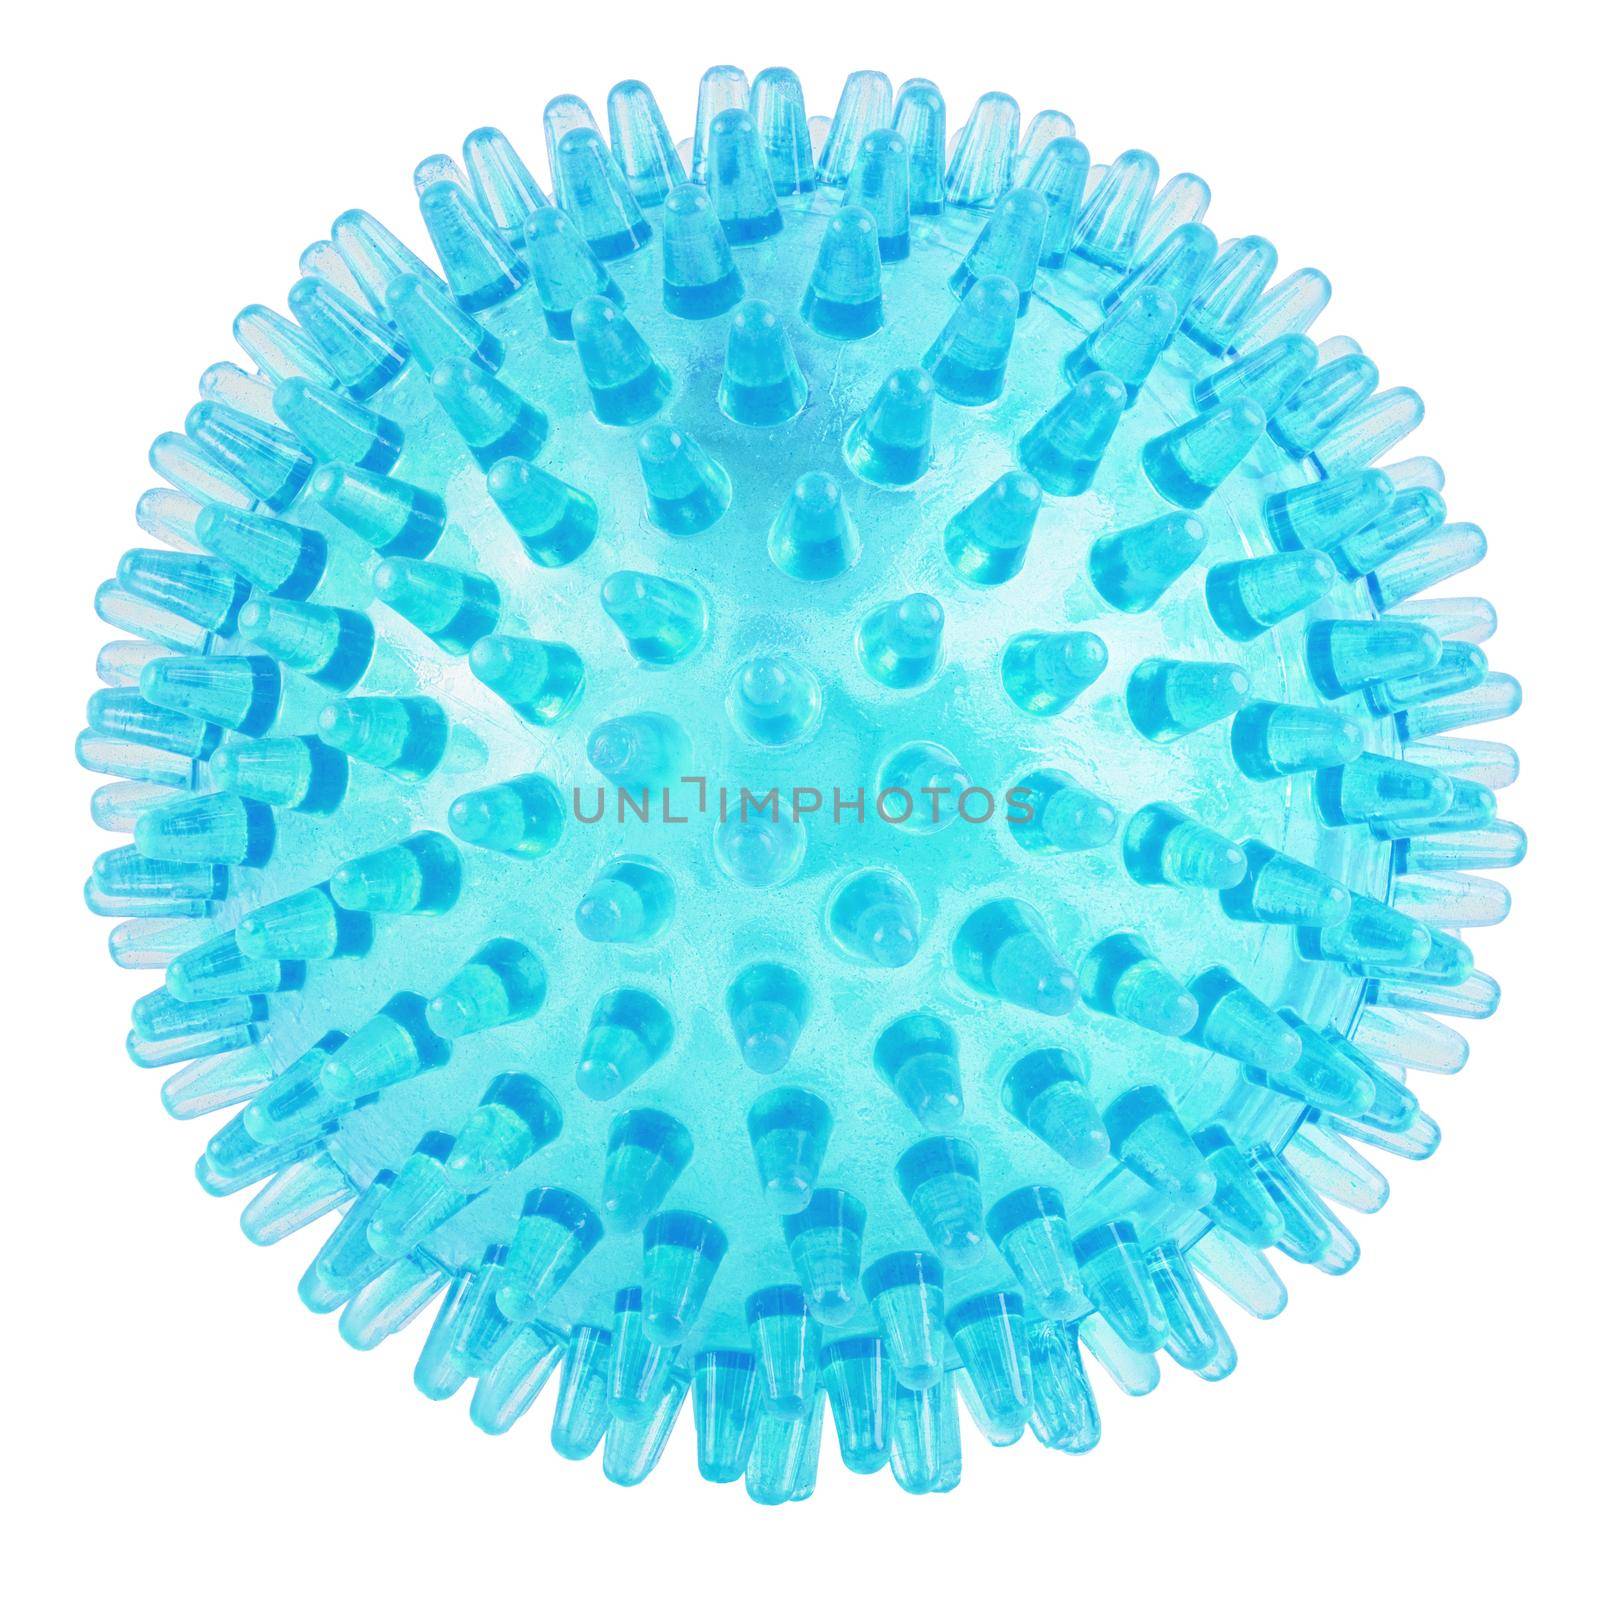 transparent cyan blue spiked plastic ball isolated on white background - massager, dog toy and COVID-19 coronavirus symbol and model